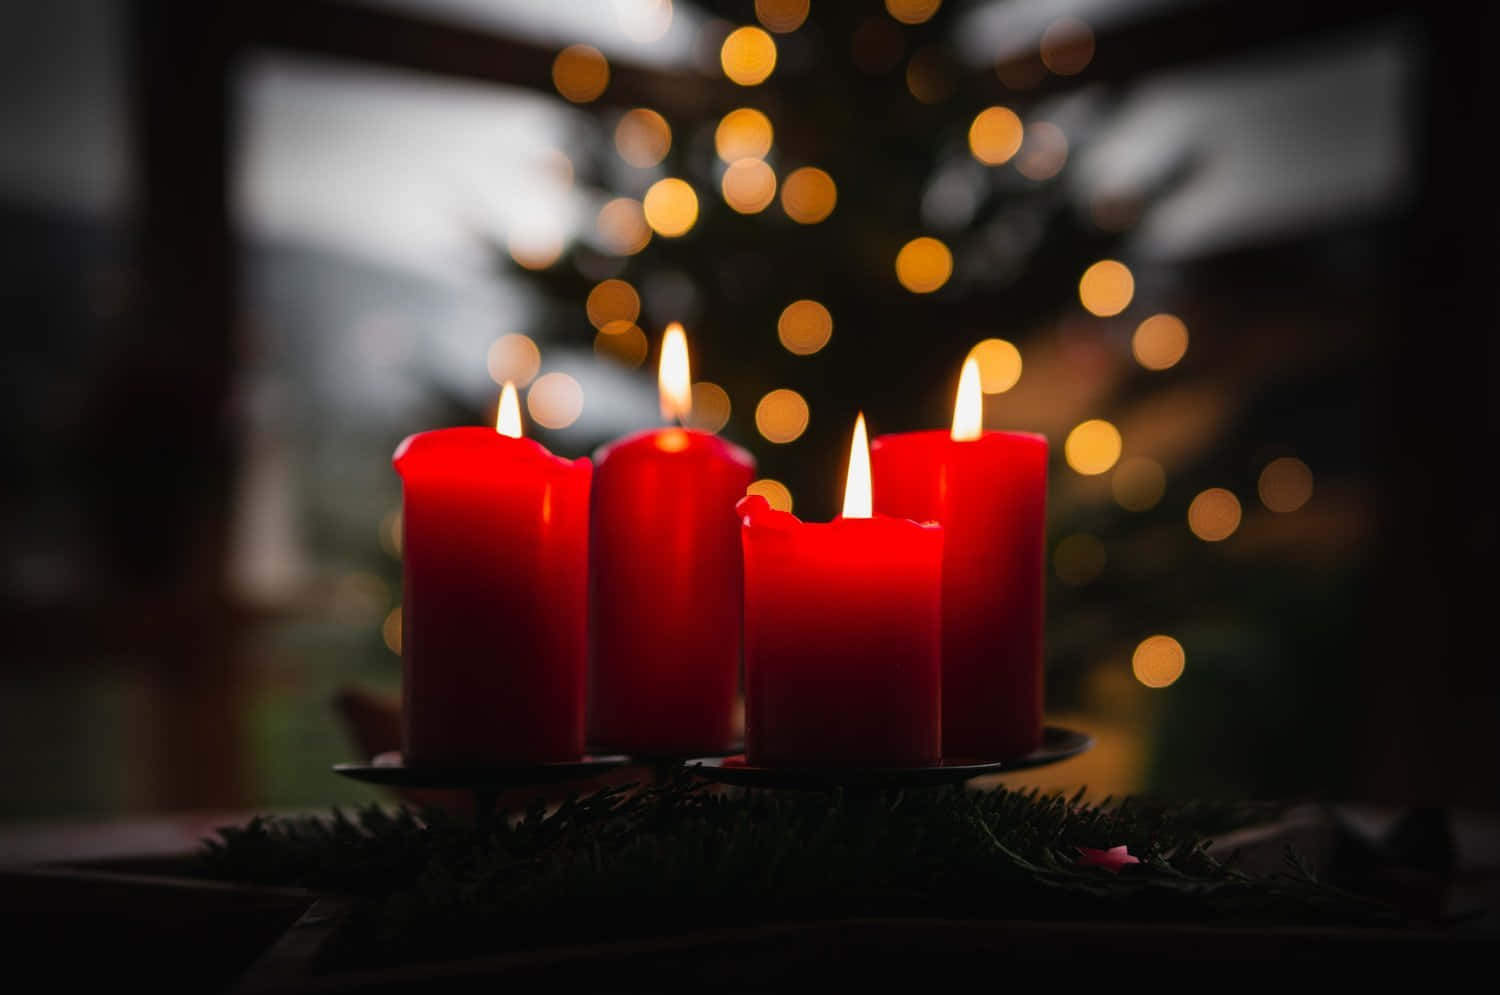 Three Red Candles Are Lit In Front Of A Christmas Tree